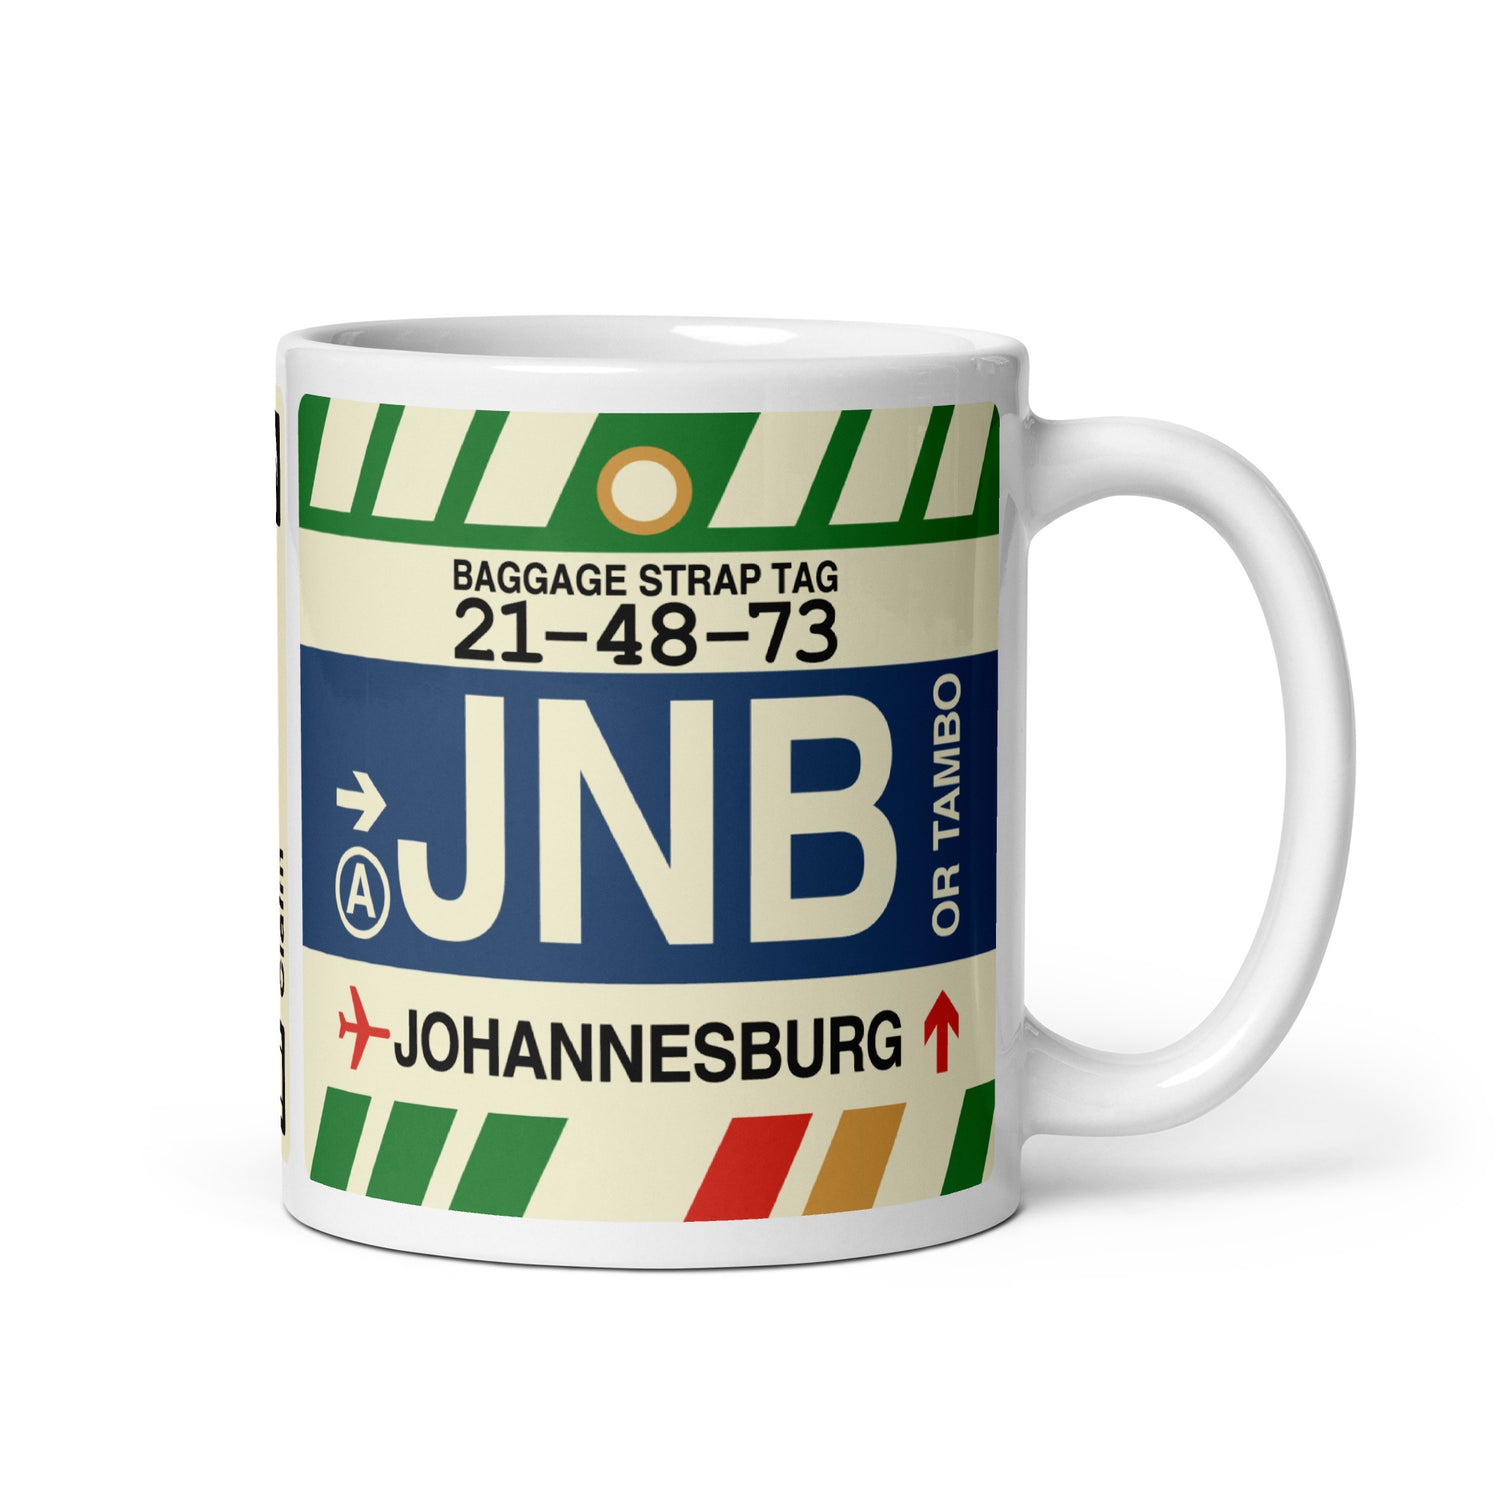 Johannesburg South Africa Coffee Mugs and Water Bottles • JNB Airport Code